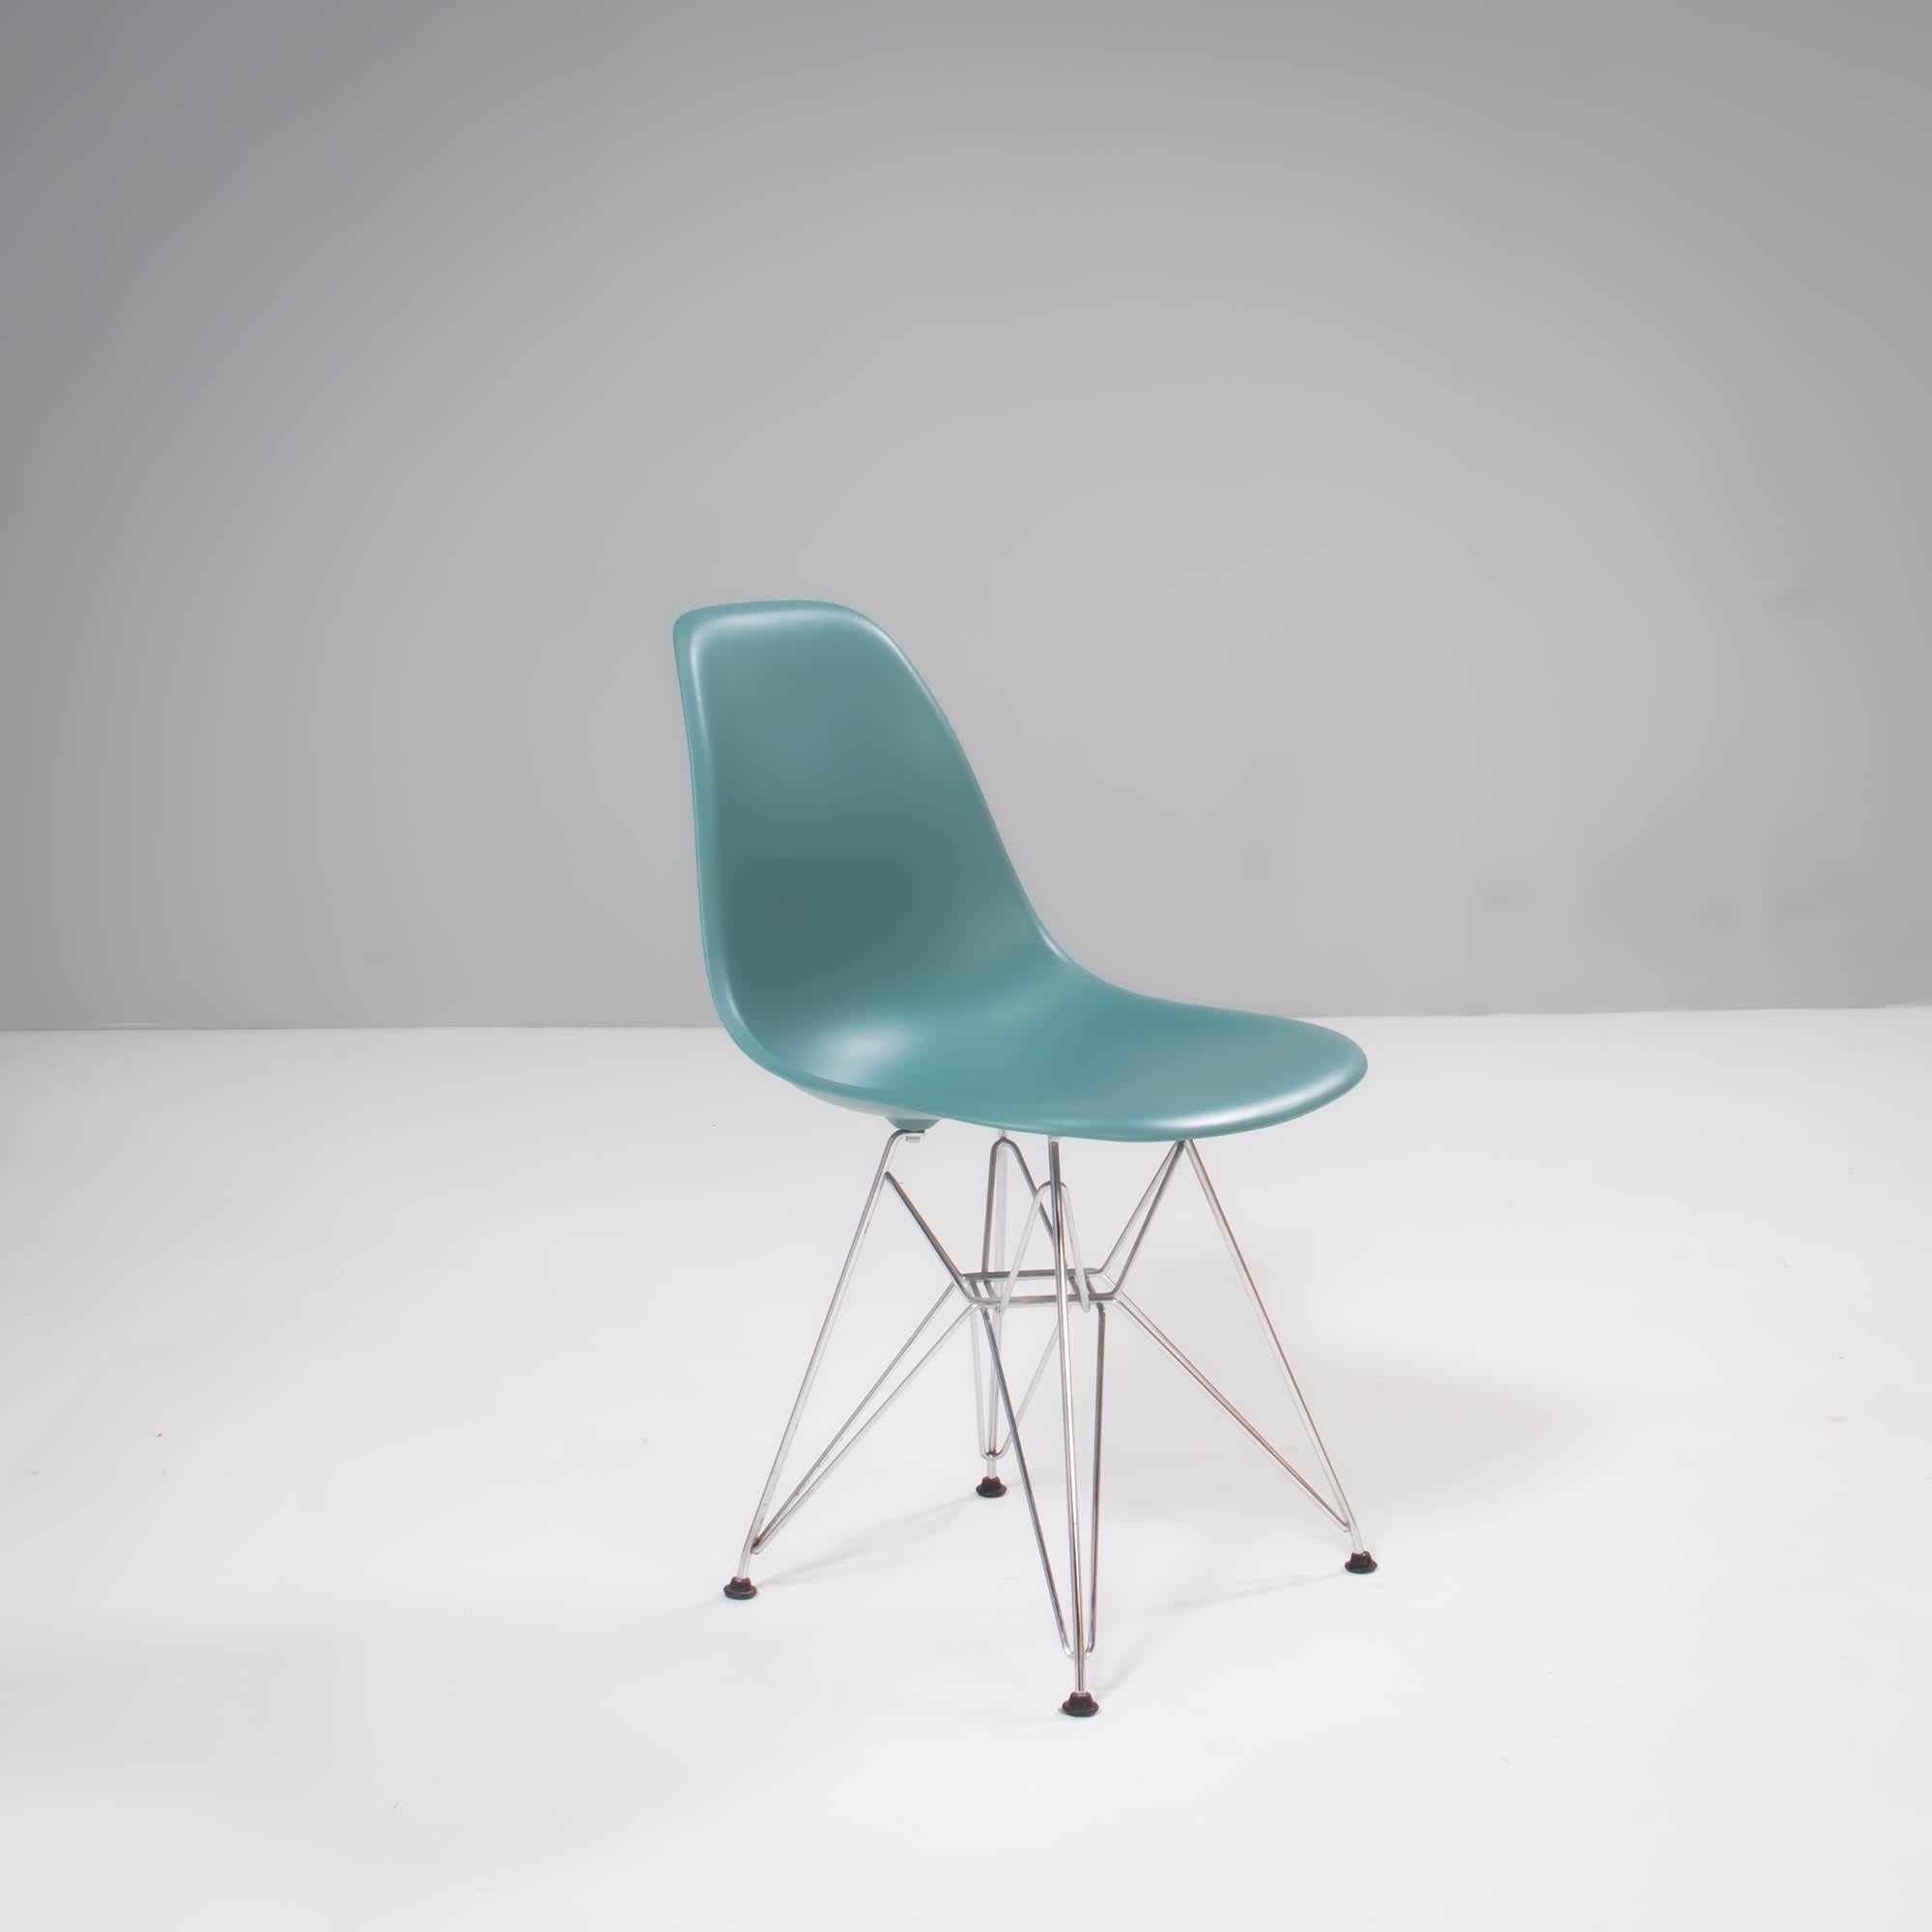 Originally designed in 1950 by Charles & Ray Eames, the DSR chair has since become one of the most recognisable furniture designs of the twentieth-century.

Designed as part of the plastic chair series, the DSR chair features the iconic chrome